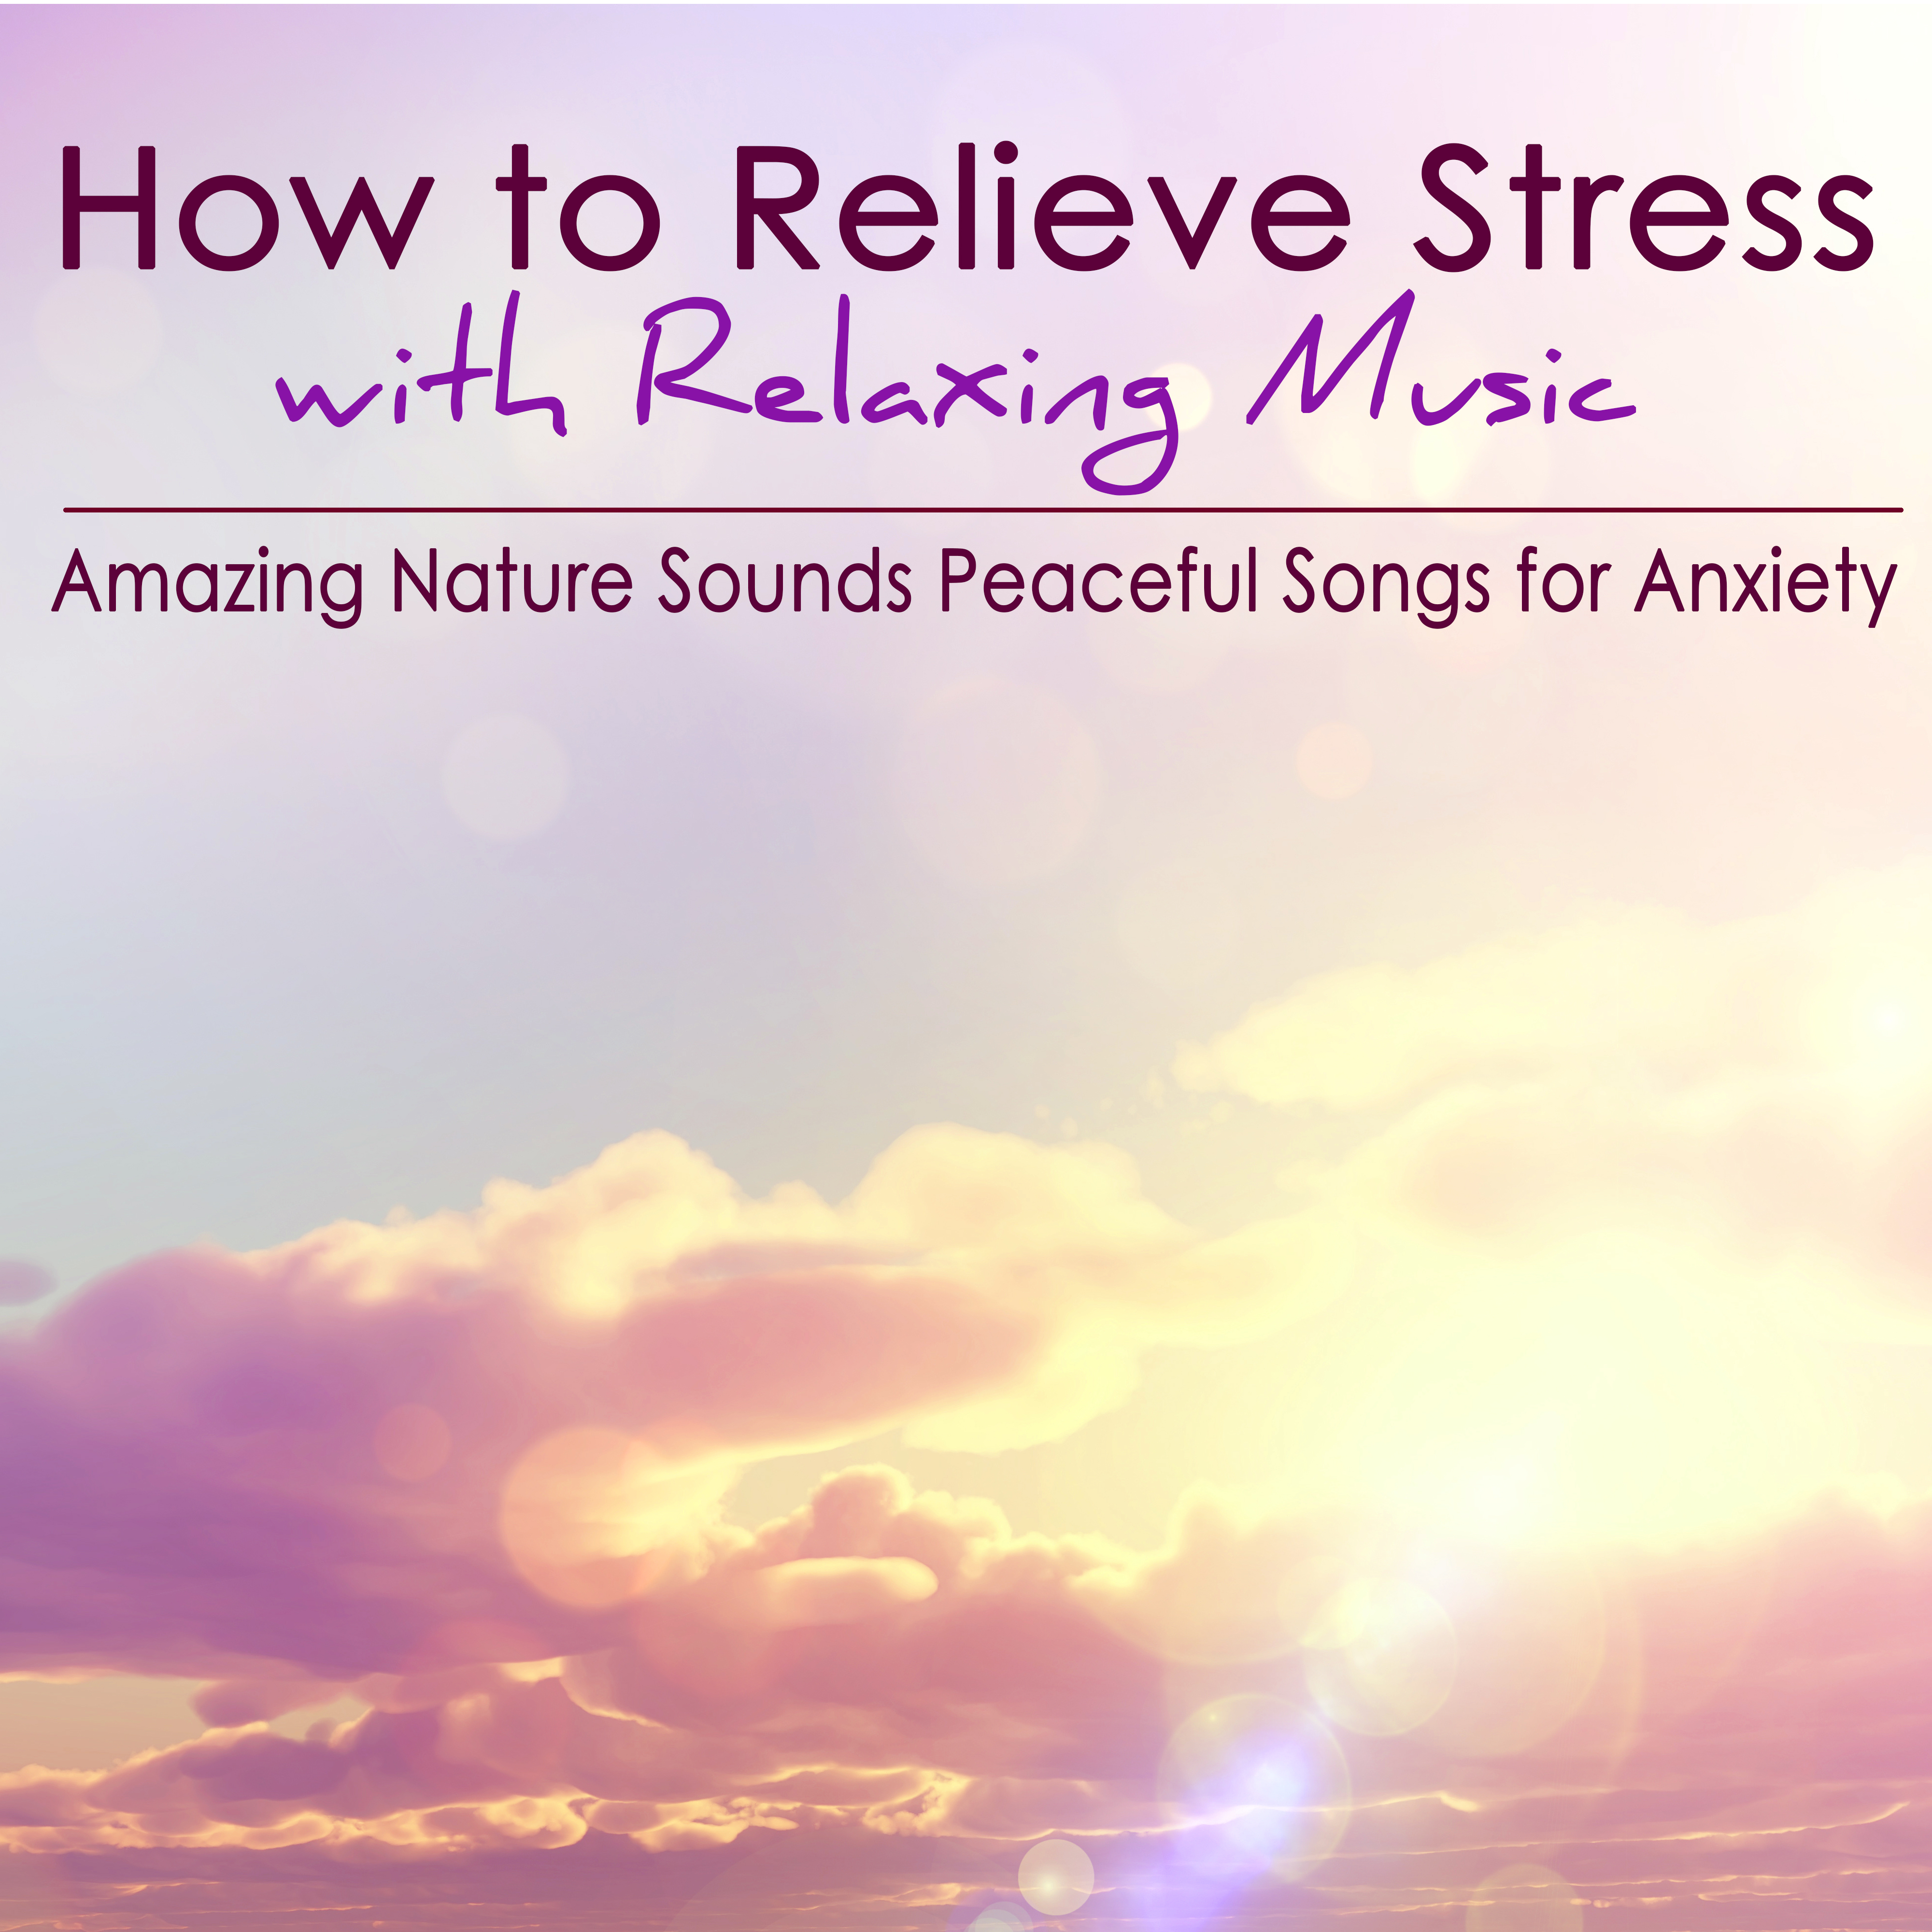 Music as Stress Reliever